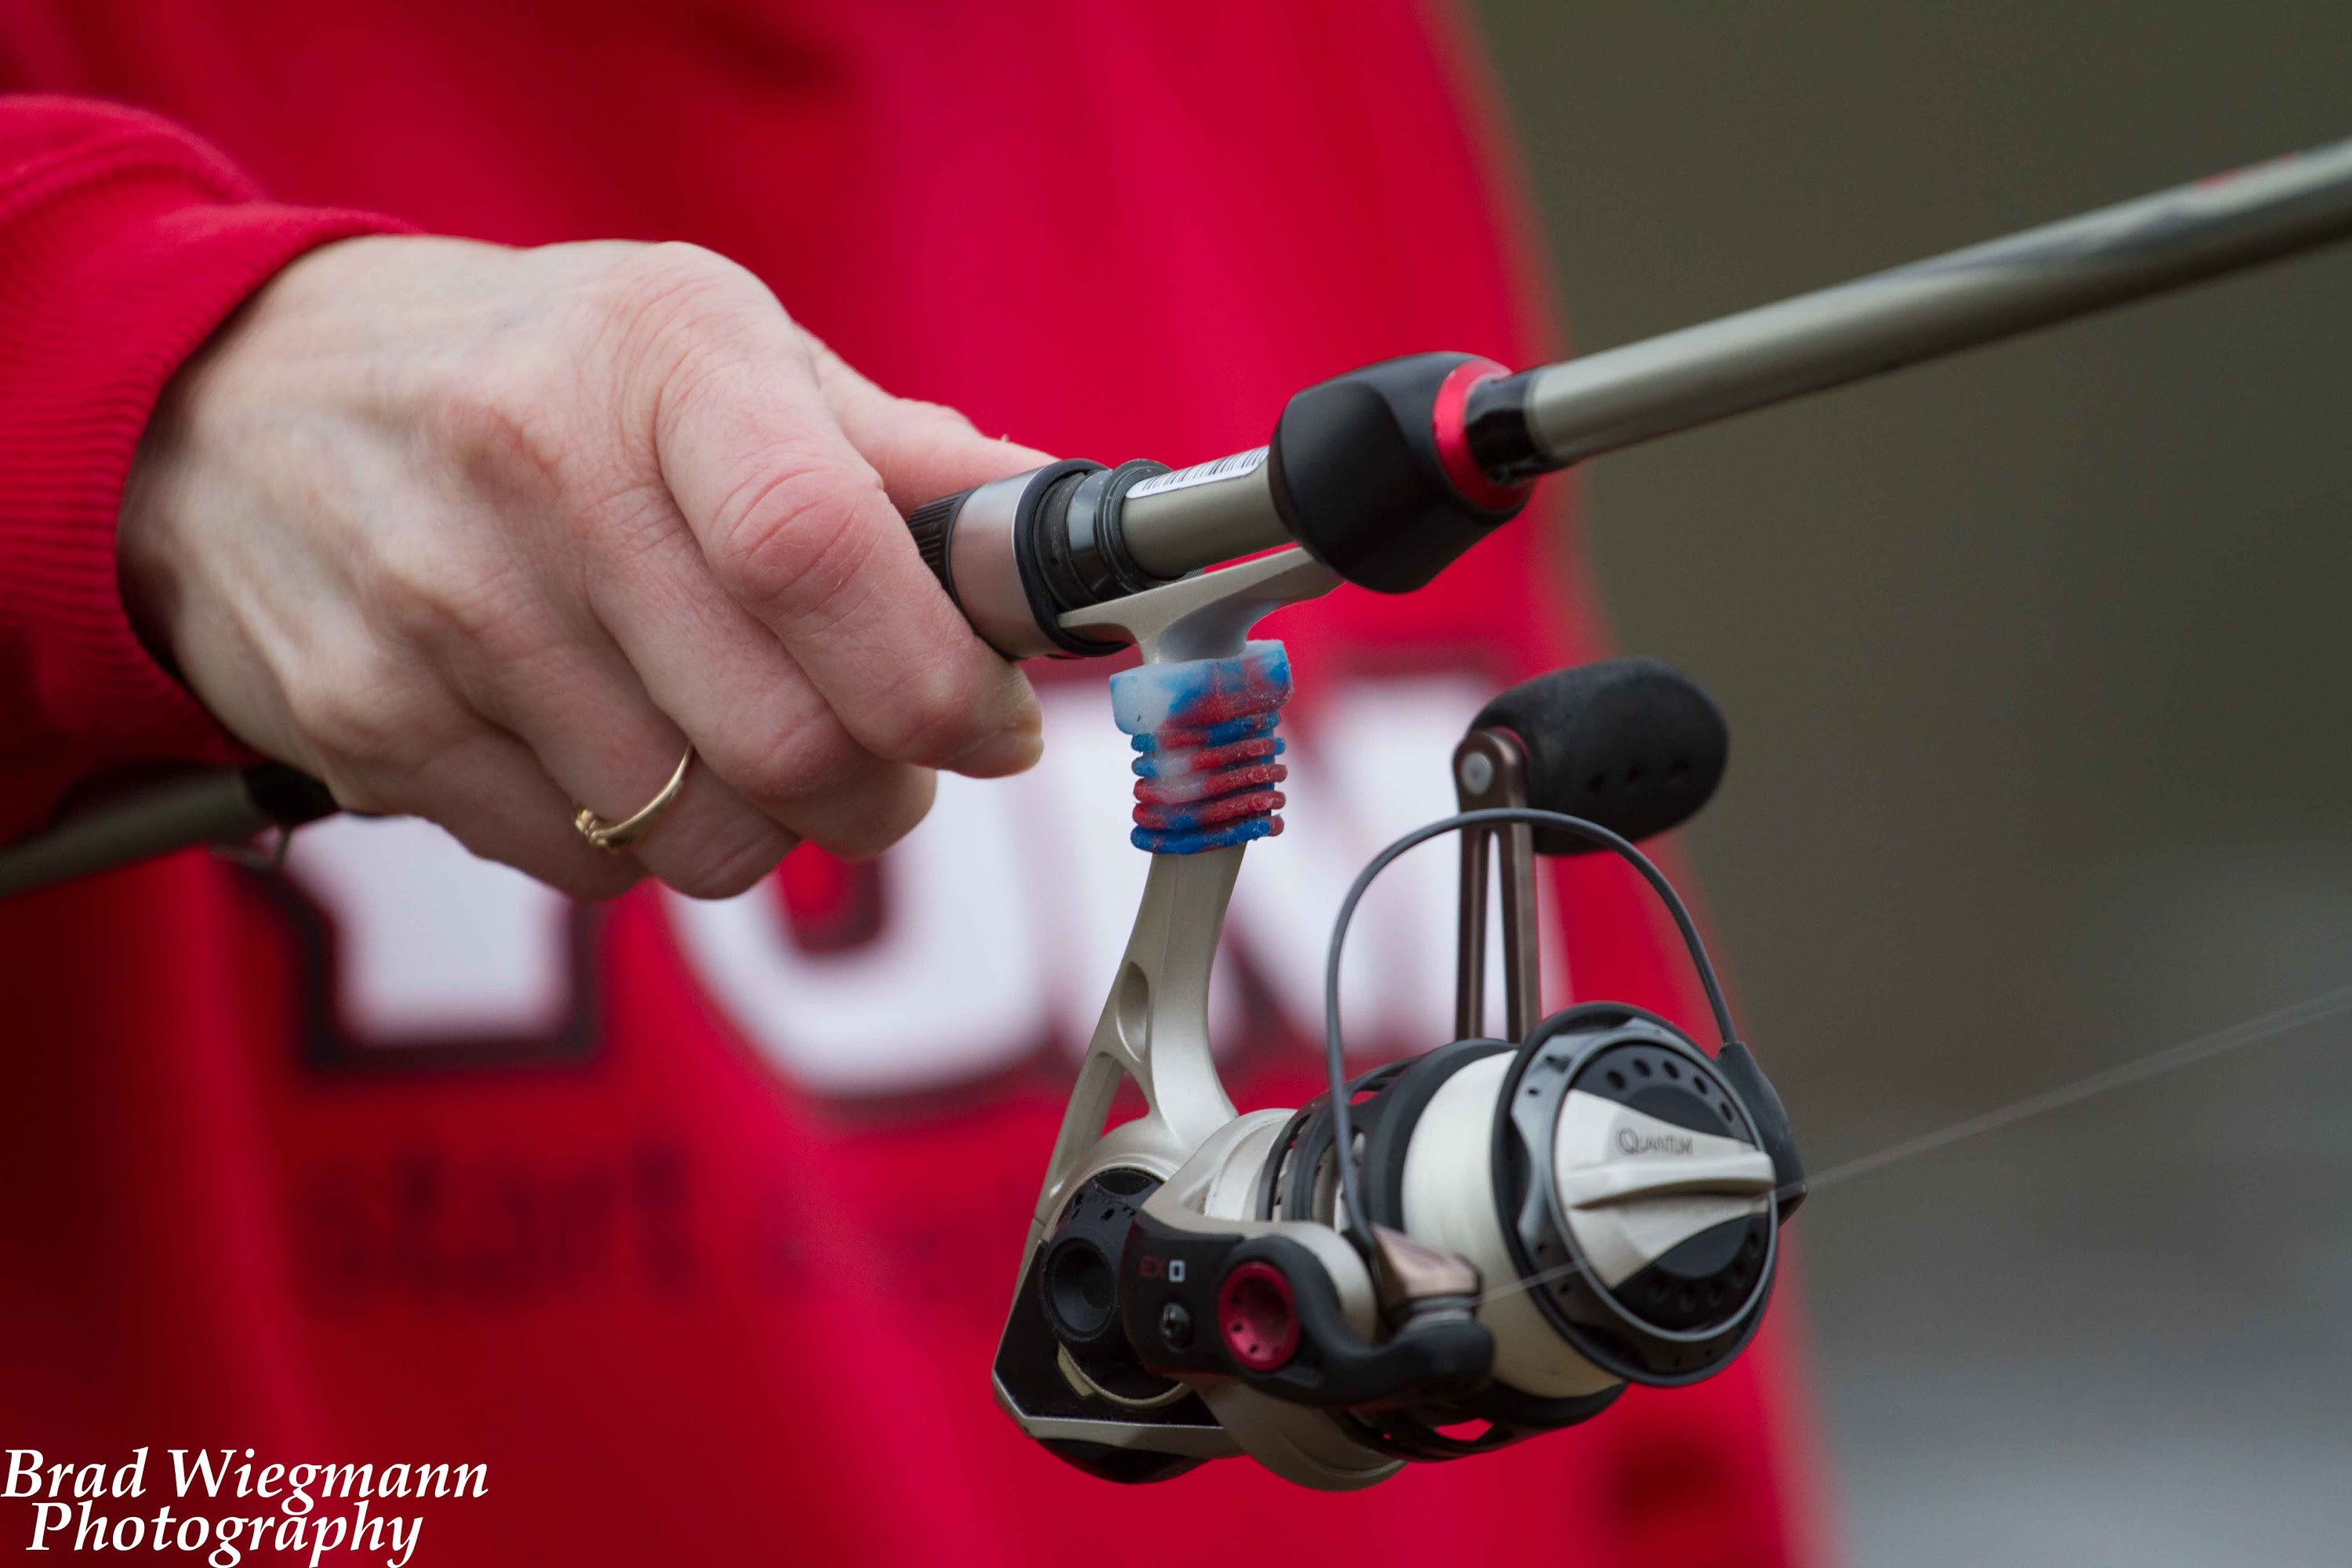 Trigger Happy Comfort Grips? - Fishing Rods, Reels, Line, and